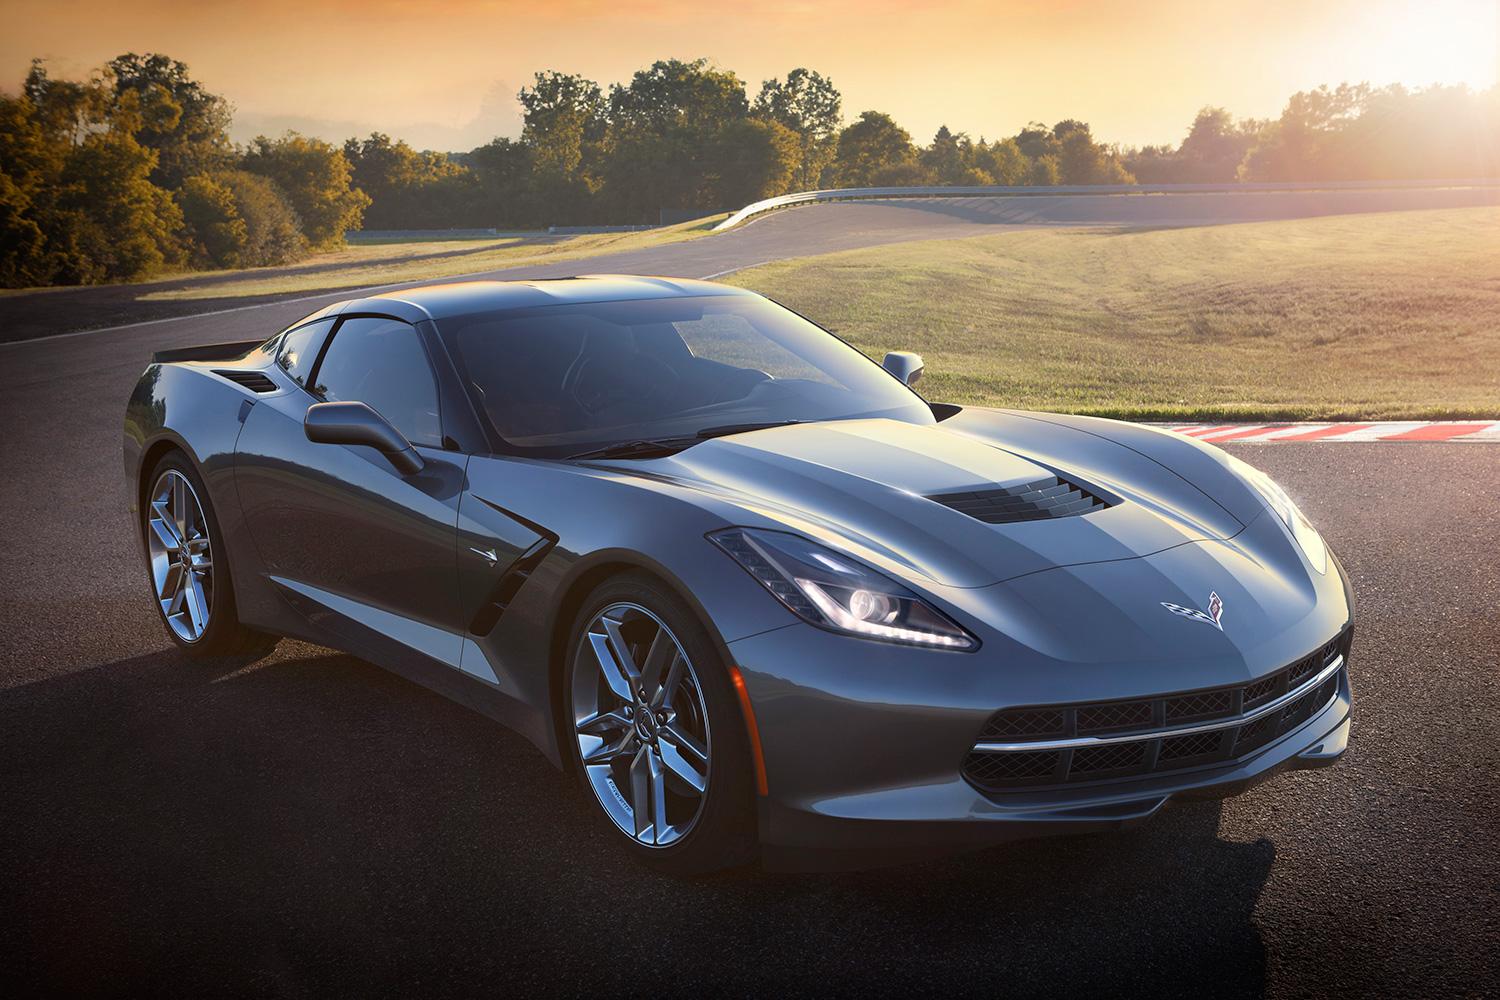 2014 Corvette Stingray exterior charcoal front right angle